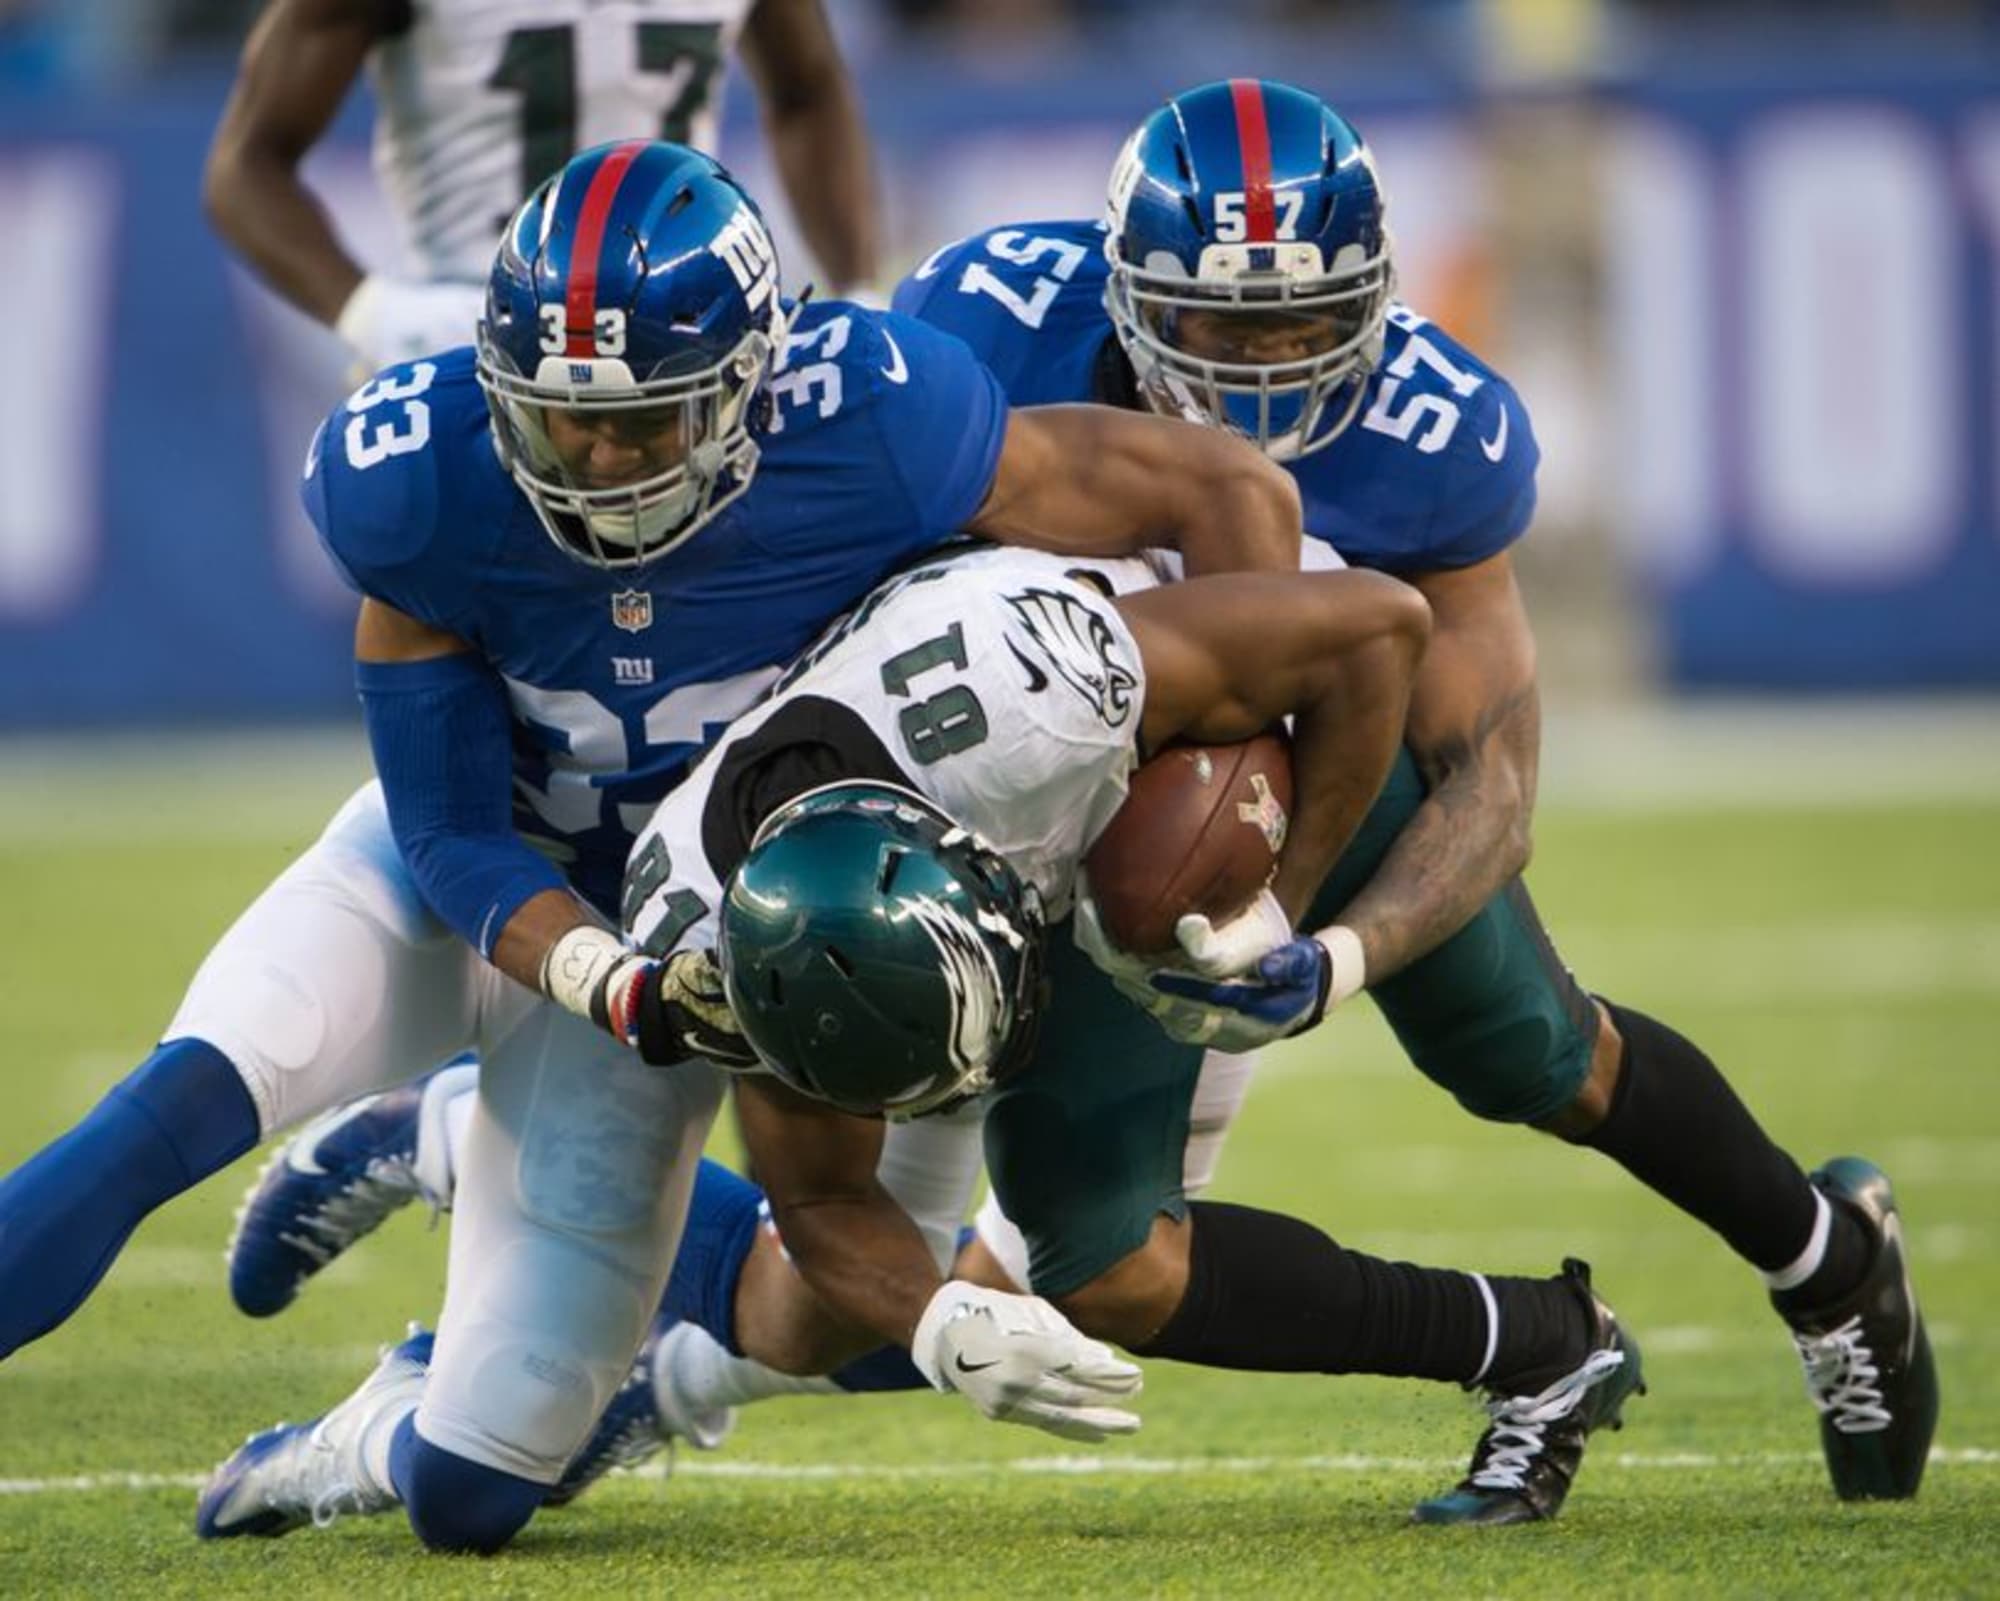 Giants at Eagles Live Stream: Watch NFL Online